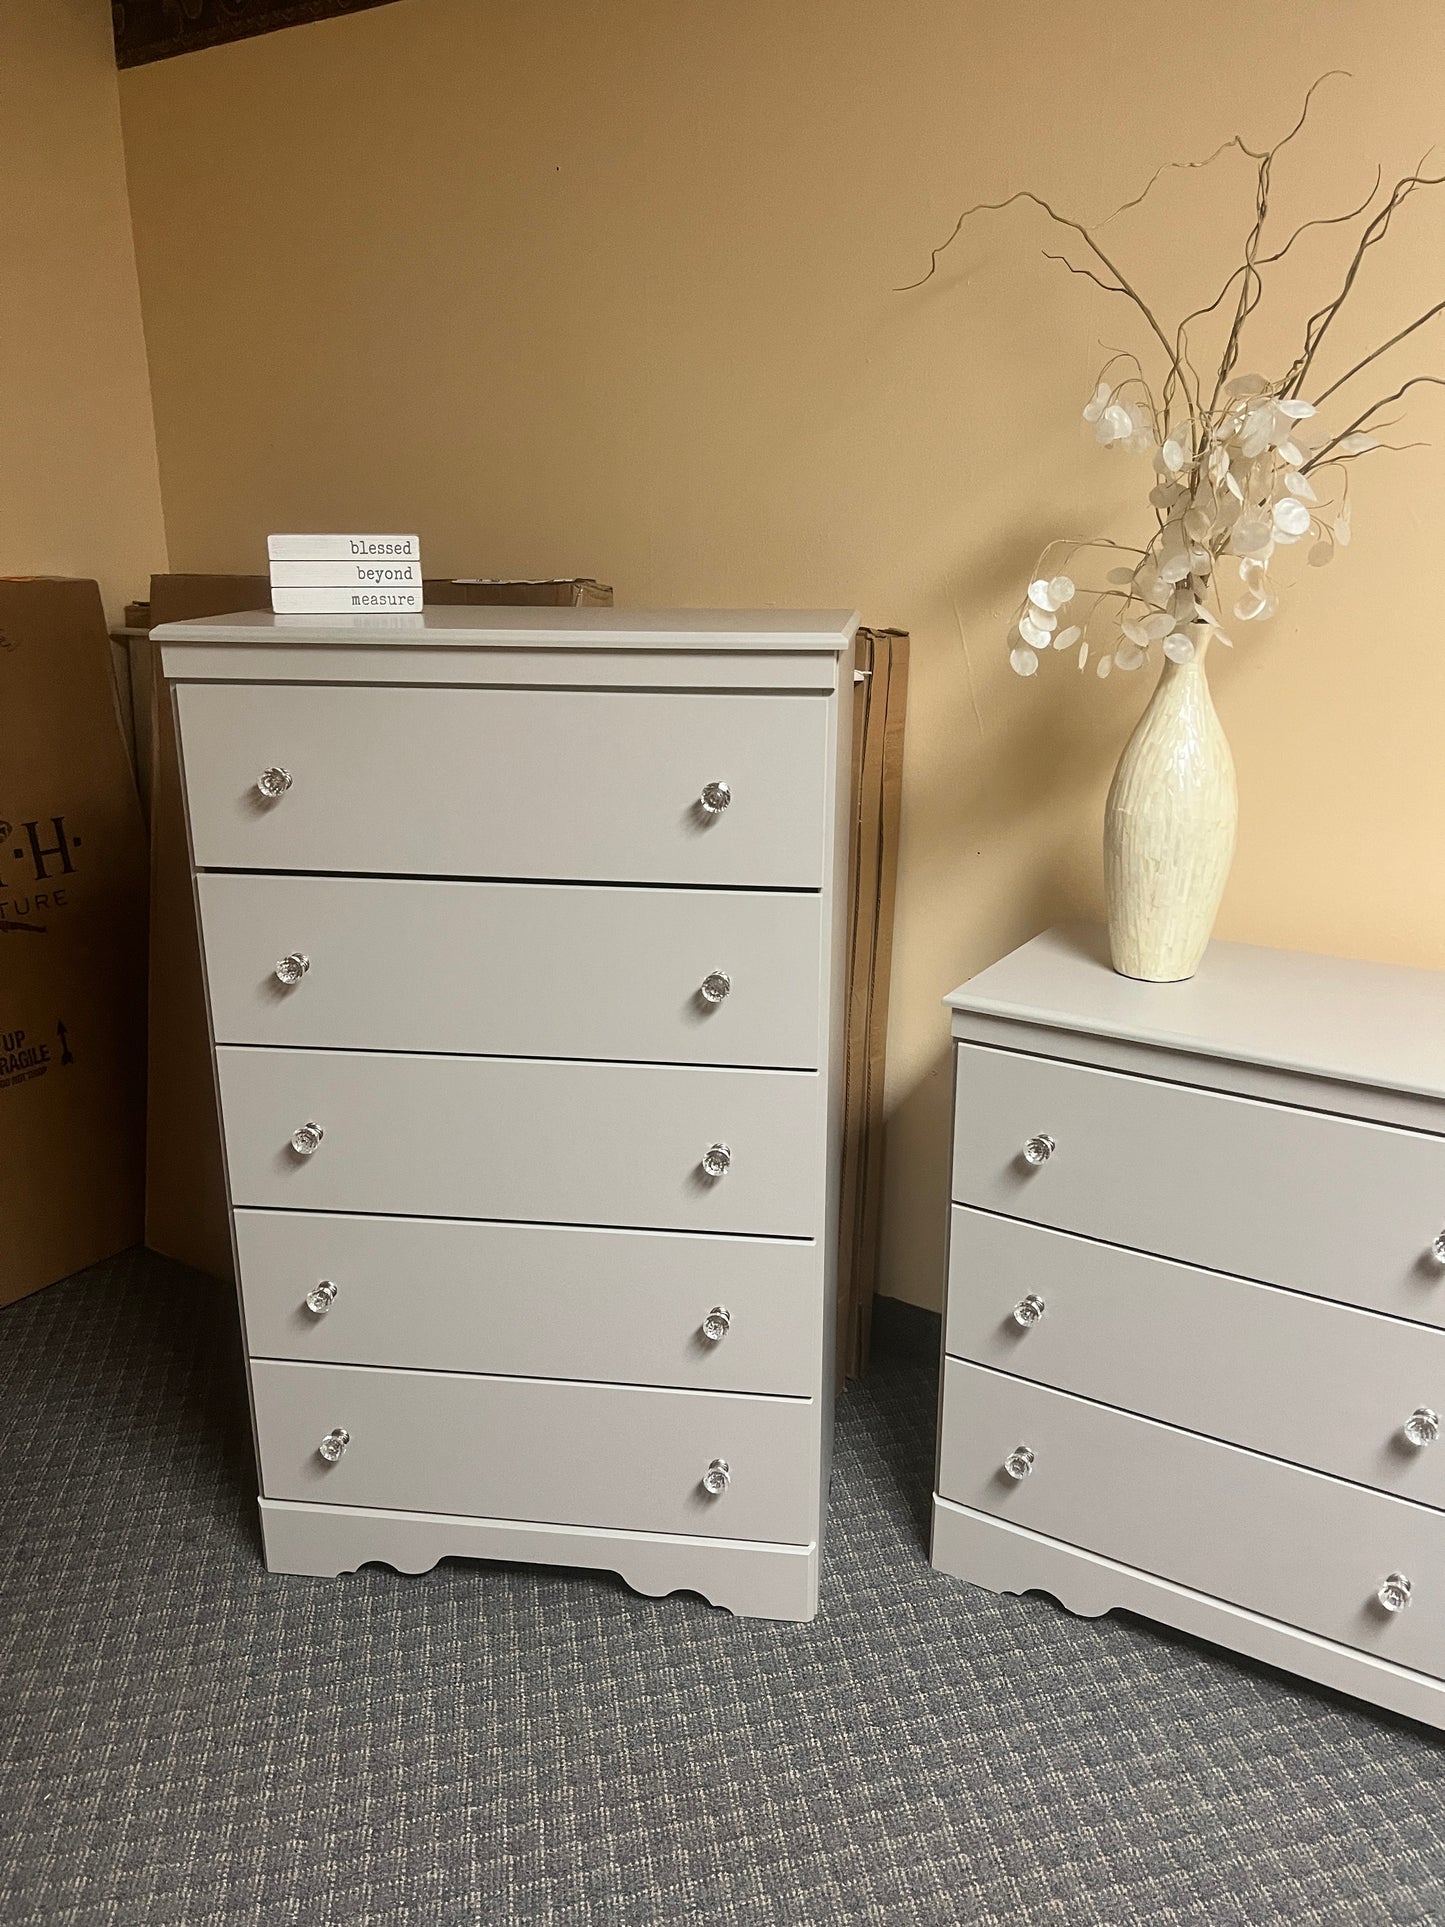 Gorgeous Brand new Pre-assembled, Made in USA, Three piece grey bedroom set. Comes with dresser, chest of drawers, and night stand